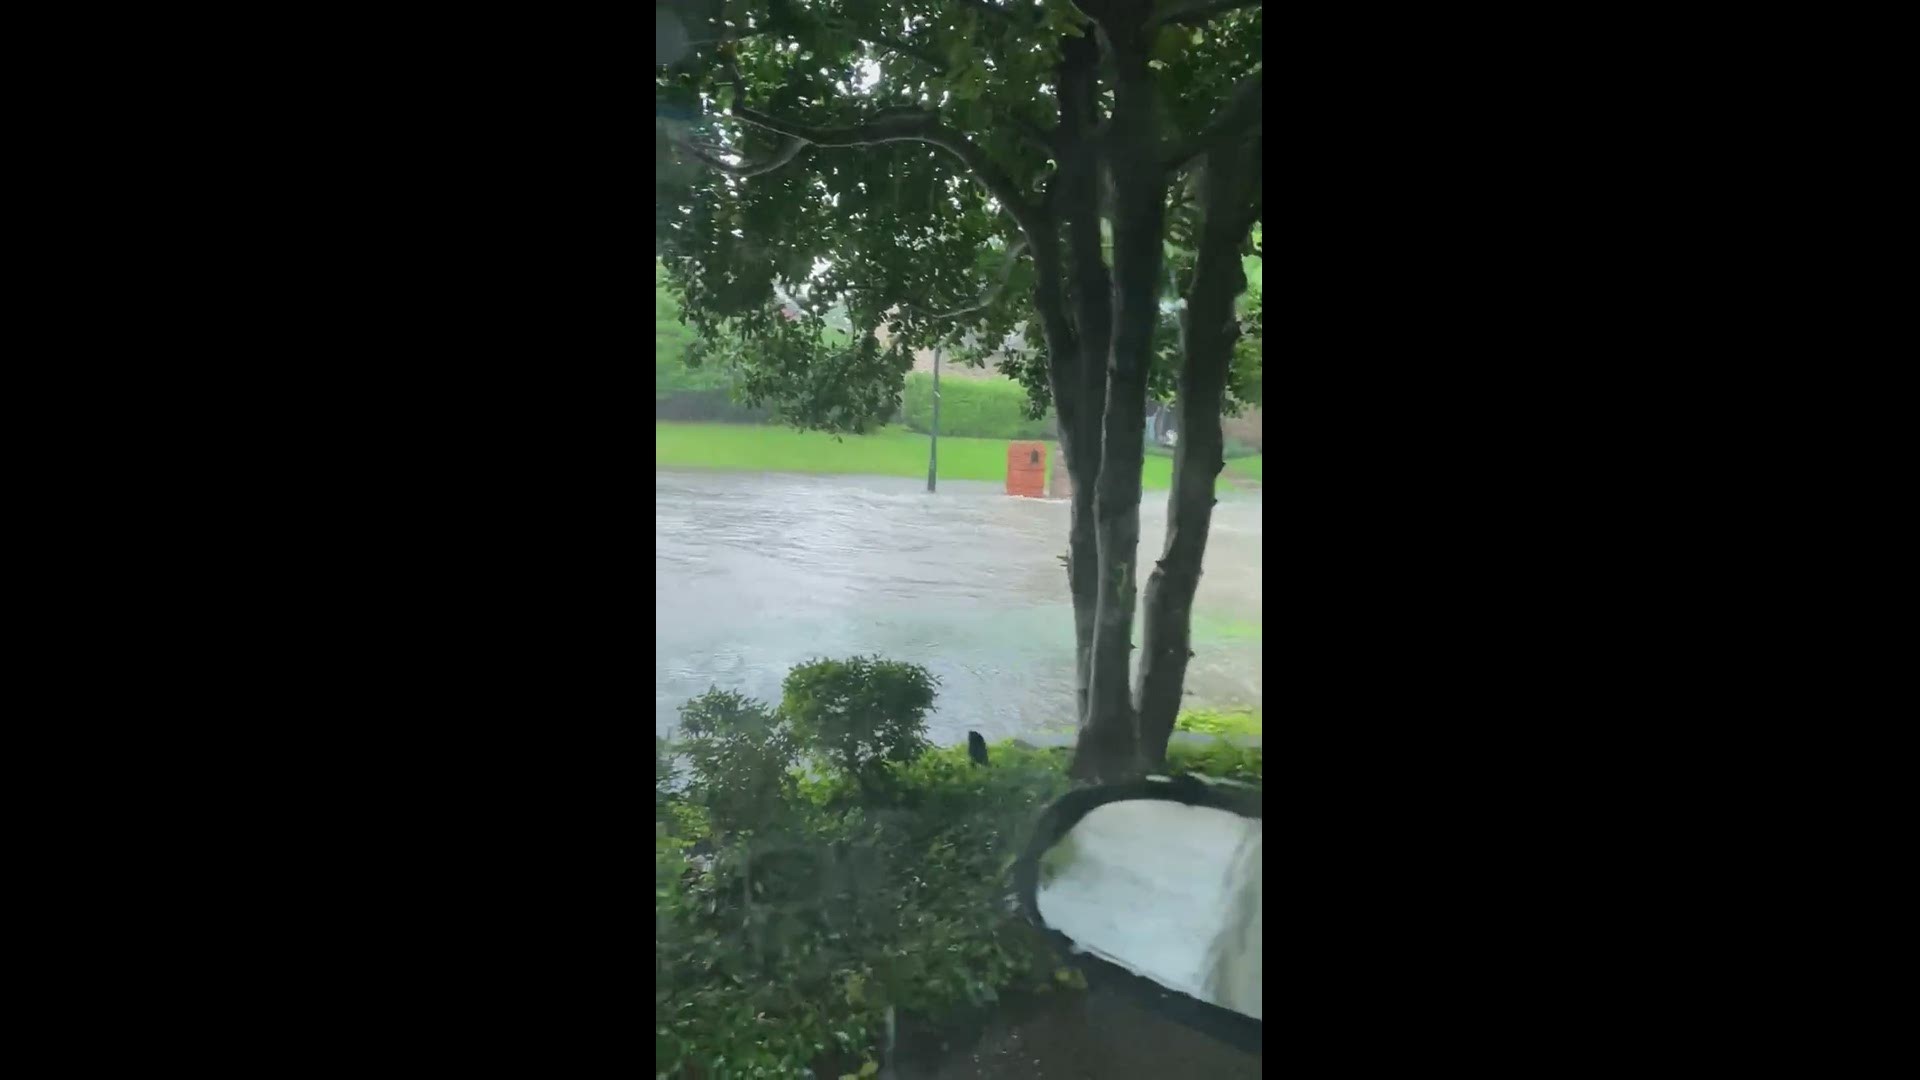 The water rose very quickly on our residential street￼. It was more than our storm drains could handle.￼
Credit: Ron Hearne